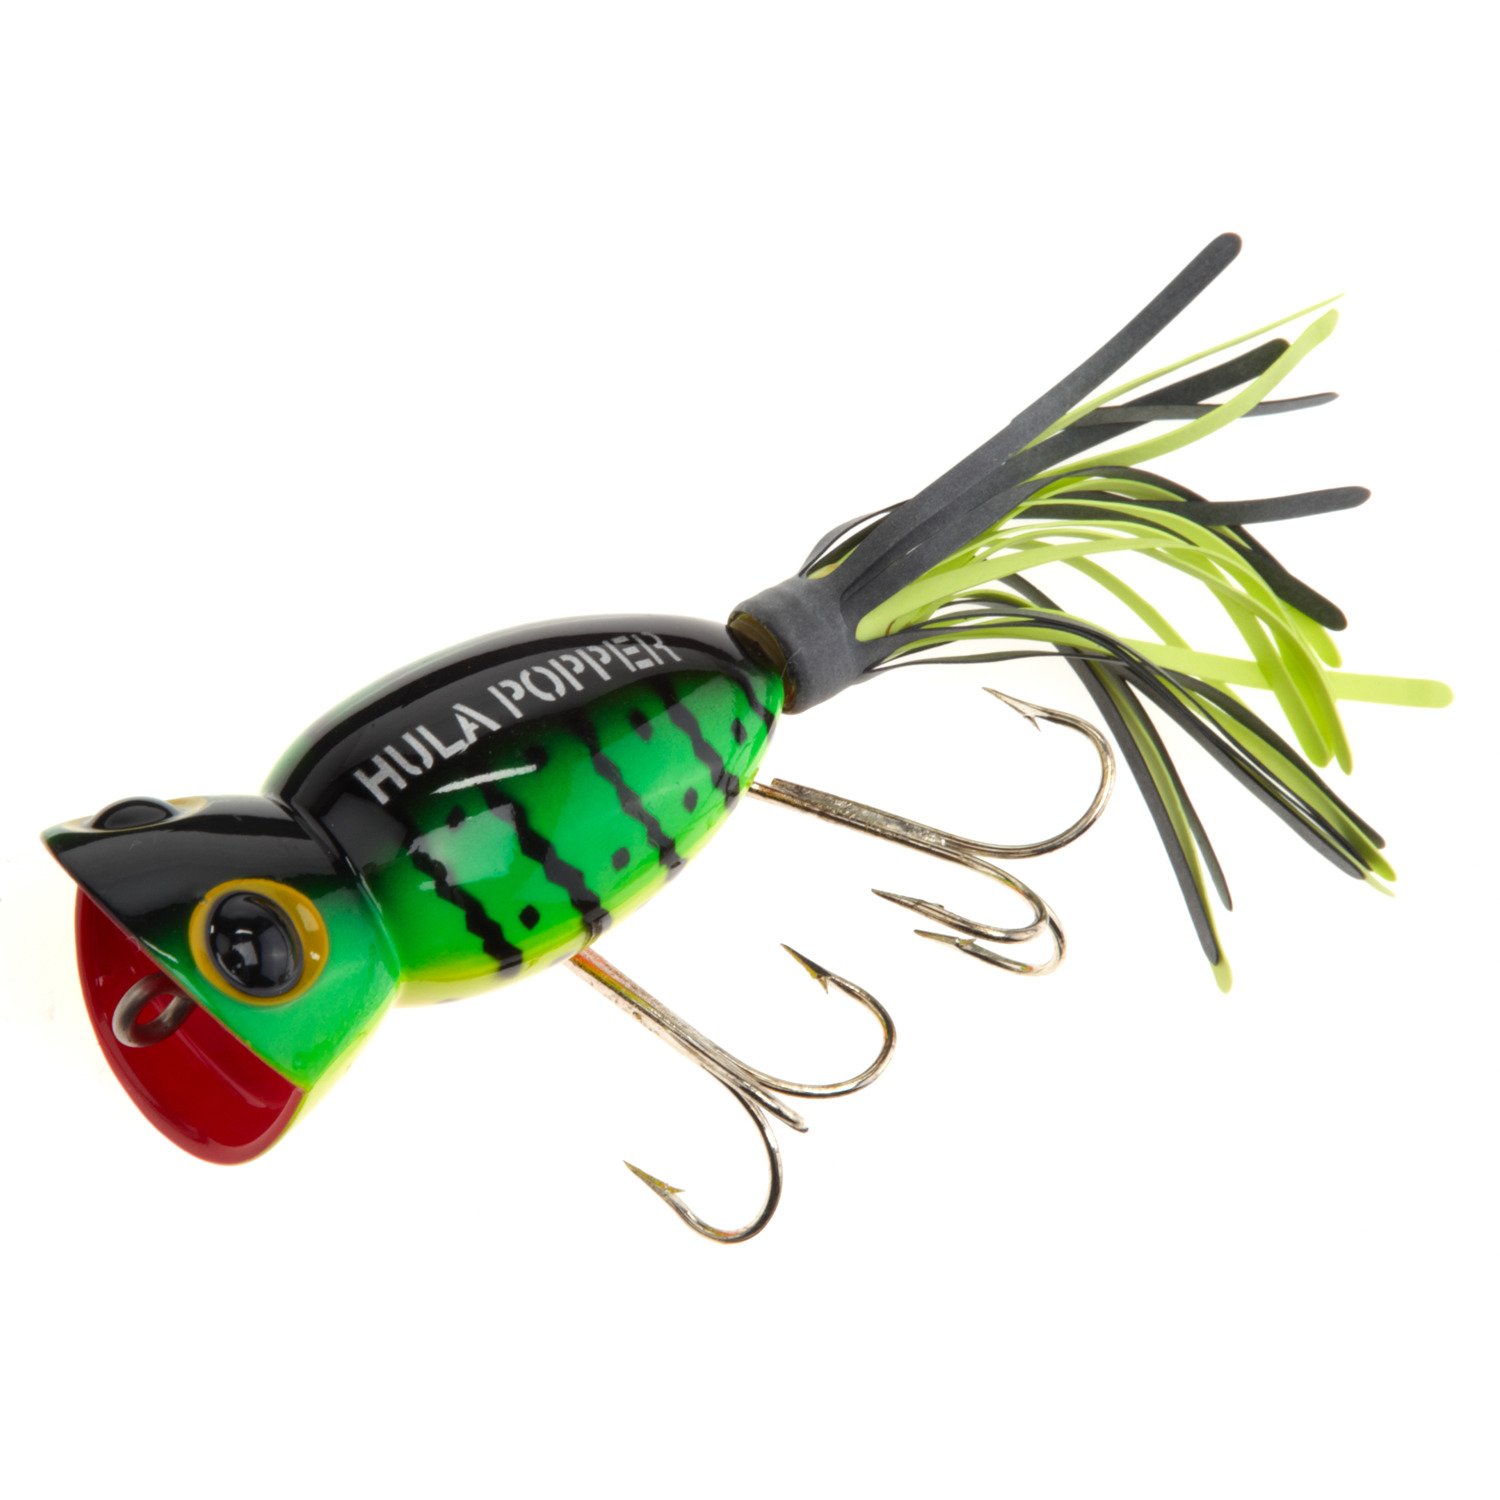 Arbogast Triple Threat Fishing Lure 3-Pack - Includes Jitterbug Lures and  Hula Popper Lures